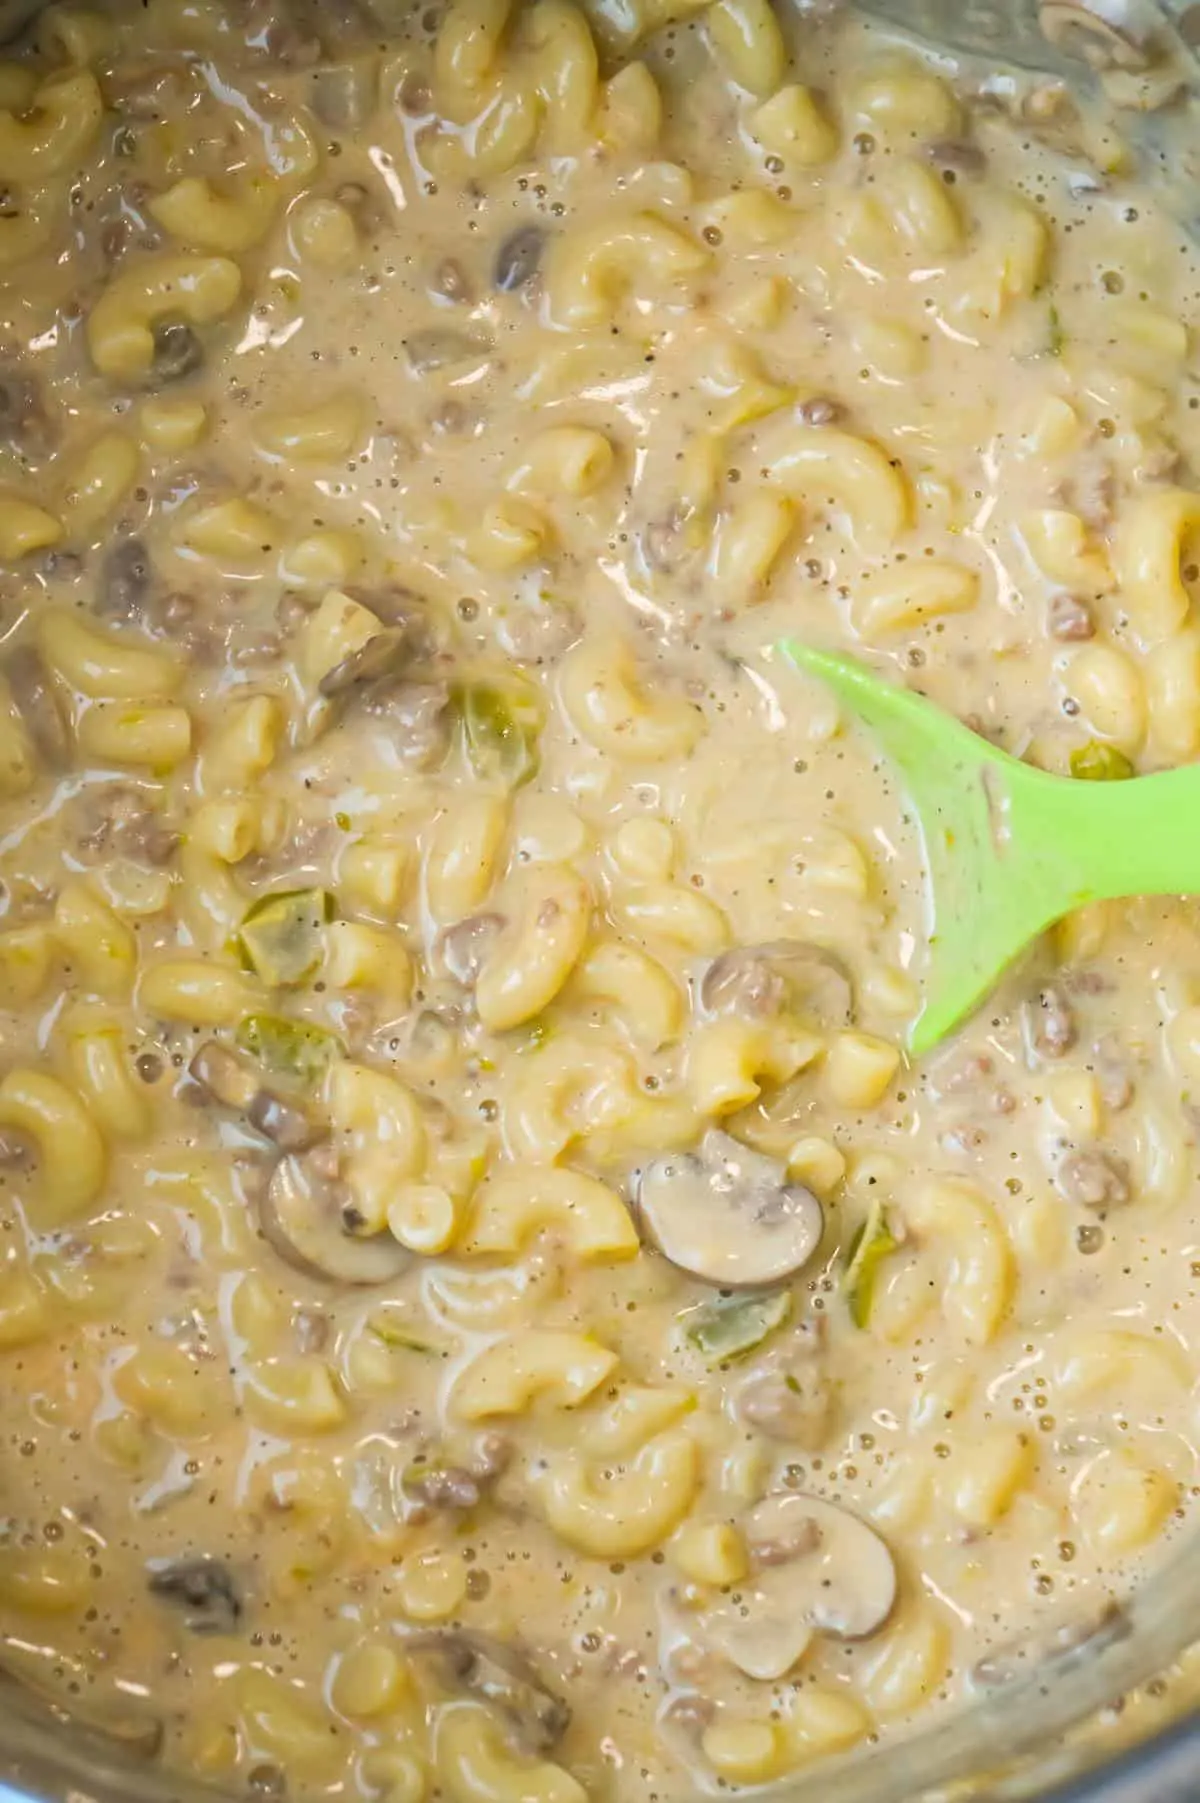 Instant Pot Philly Cheese Steak Pasta is a hearty pressure cooker macaroni recipe loaded with ground beef, green peppers, onions, mushrooms and cheese.